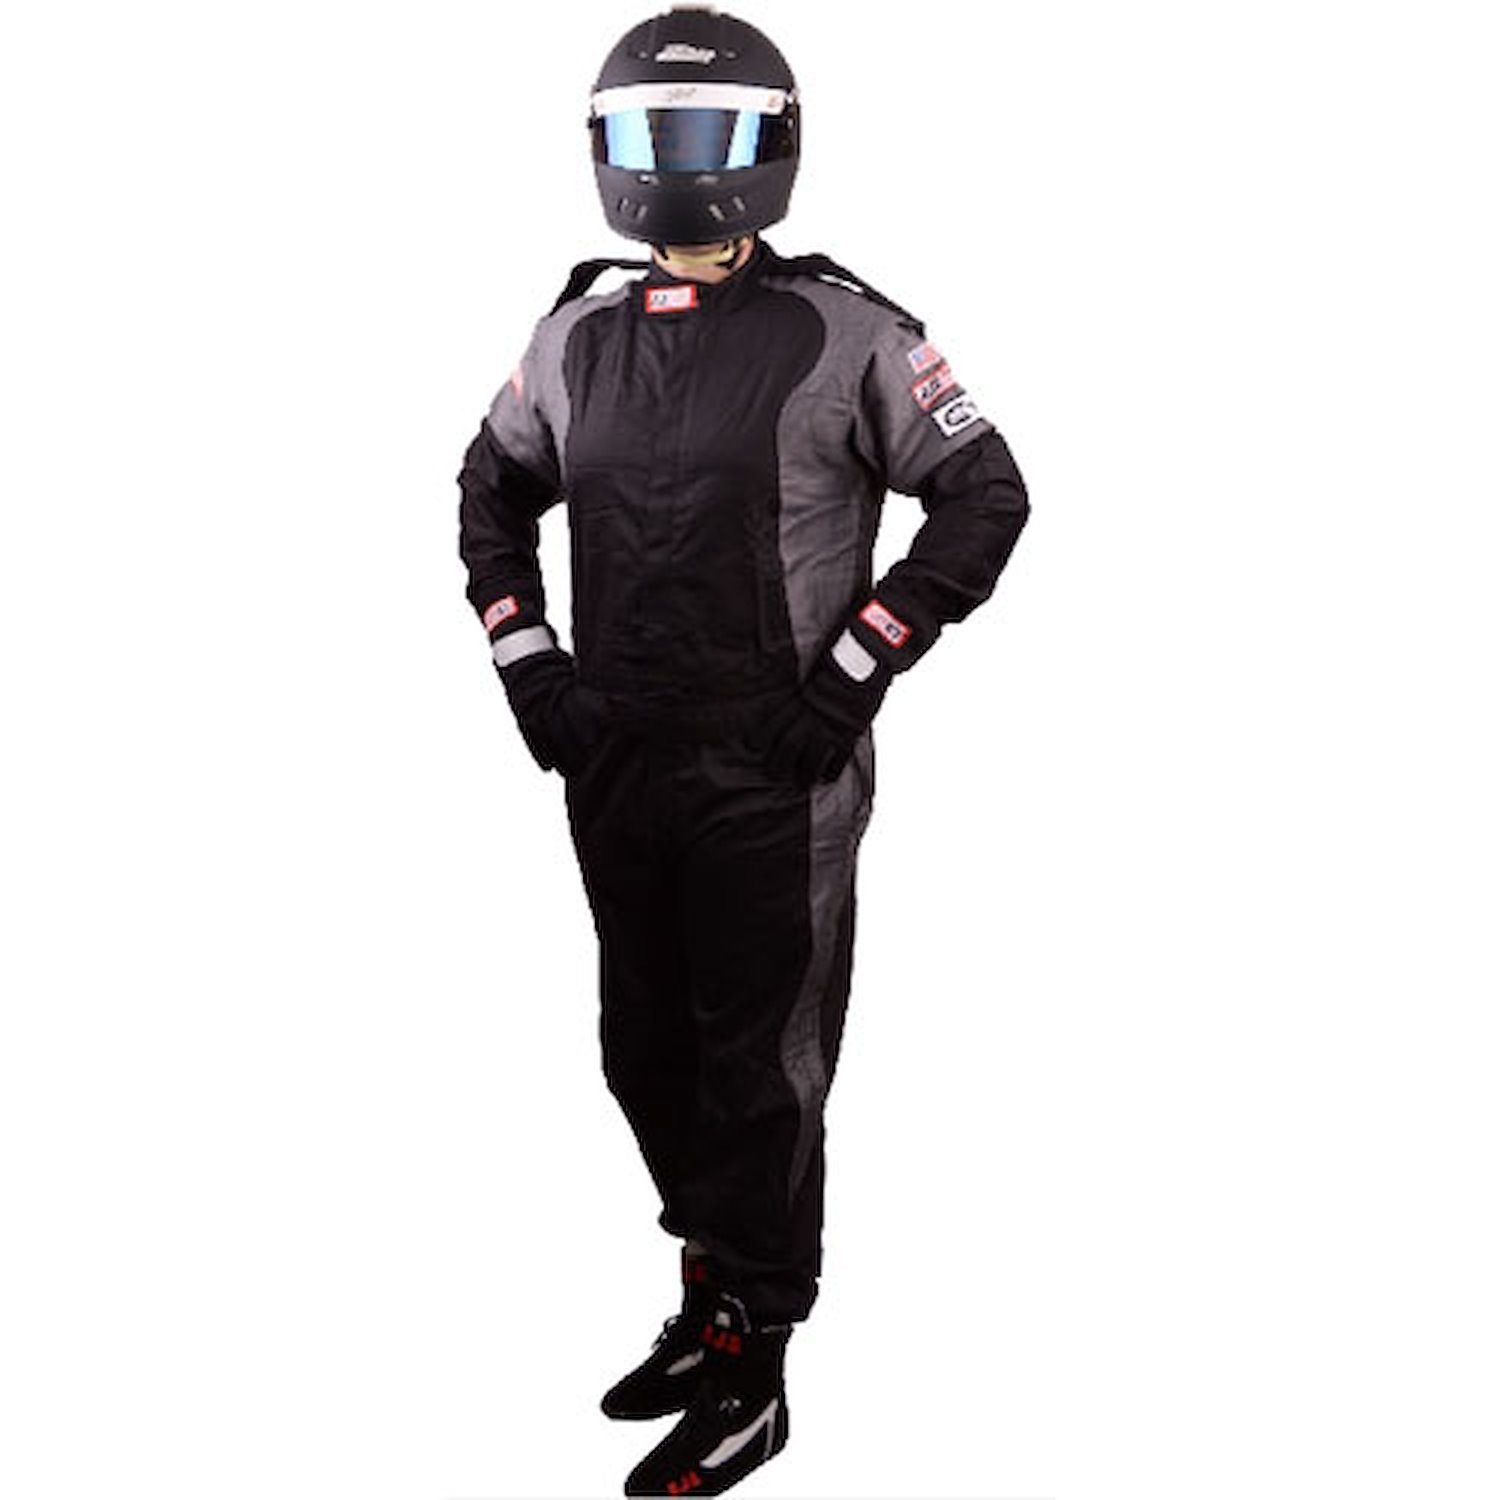 Elite Series Driving Suit 3.2 A/5 SFI Rating